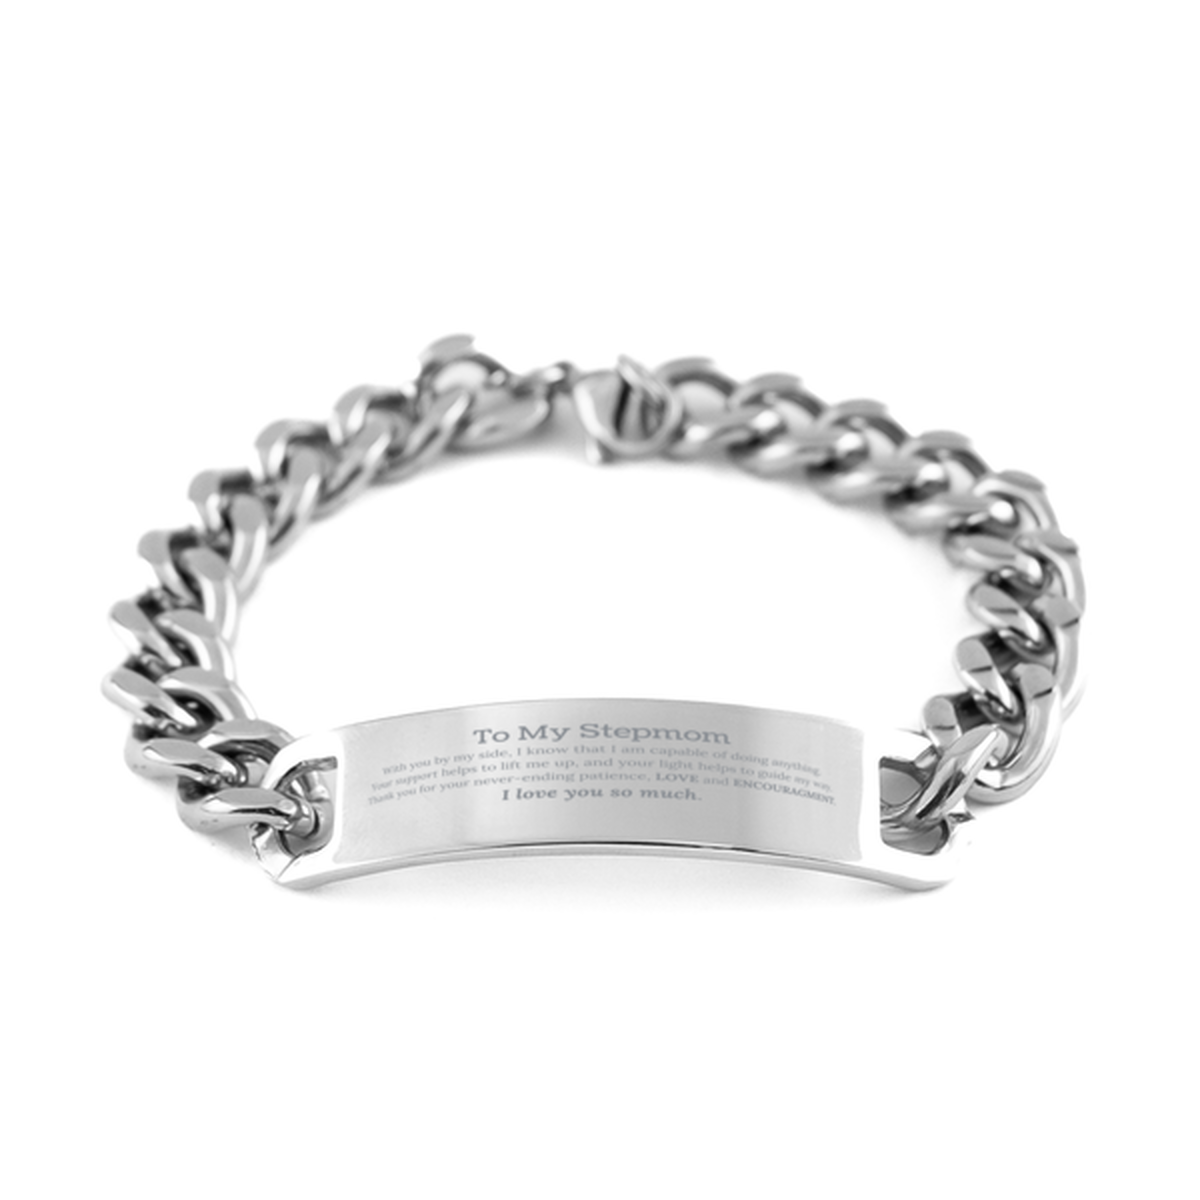 Appreciation Stepmom Cuban Chain Stainless Steel Bracelet Gifts, To My Stepmom Birthday Christmas Wedding Keepsake Gifts for Stepmom With you by my side, I know that I am capable of doing anything. I love you so much